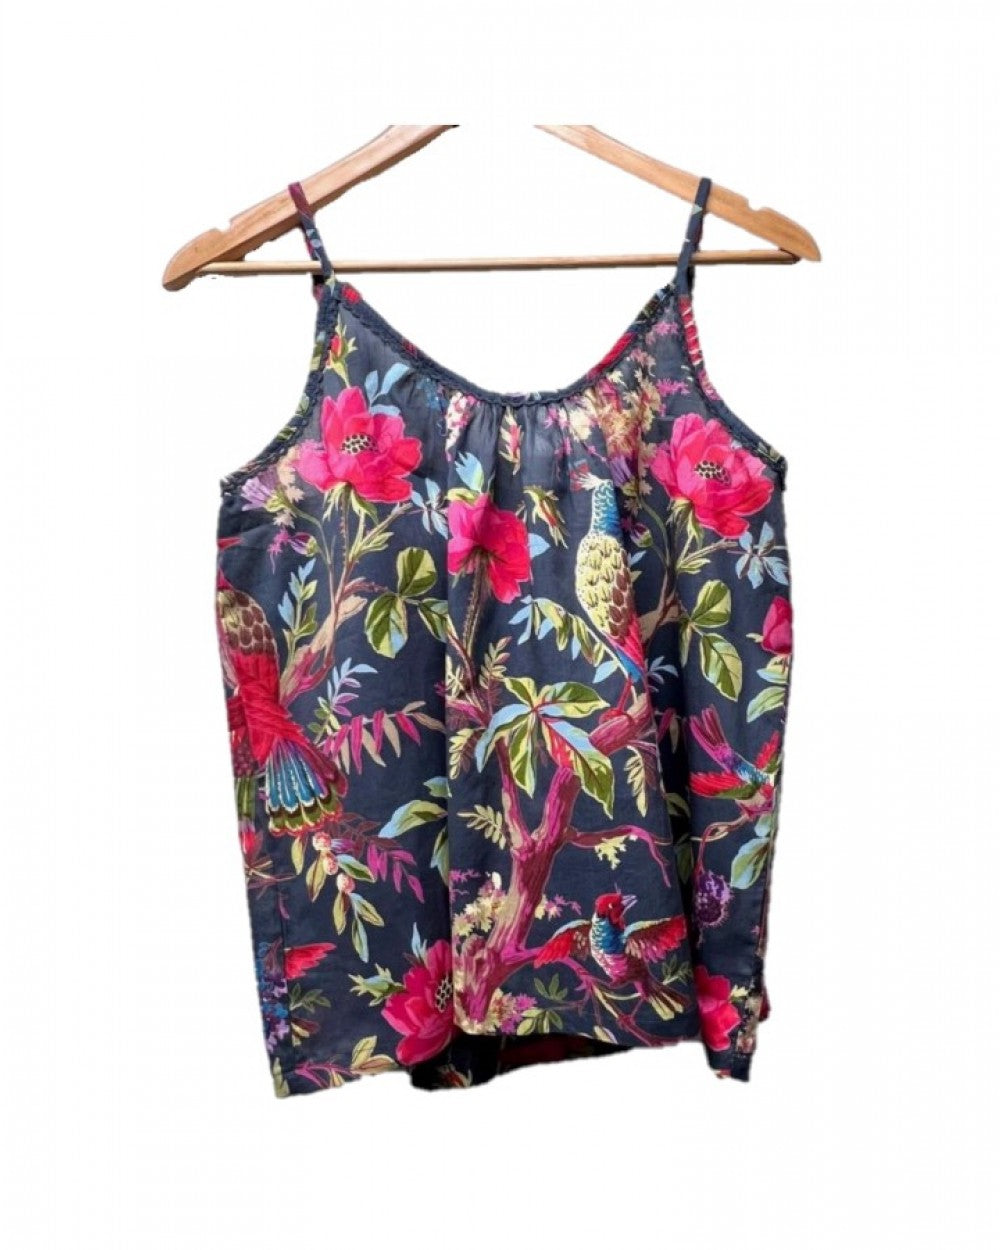 camisole top on a hanger with a vibrant pink blue and green bird and foliage patter on a dark blue background